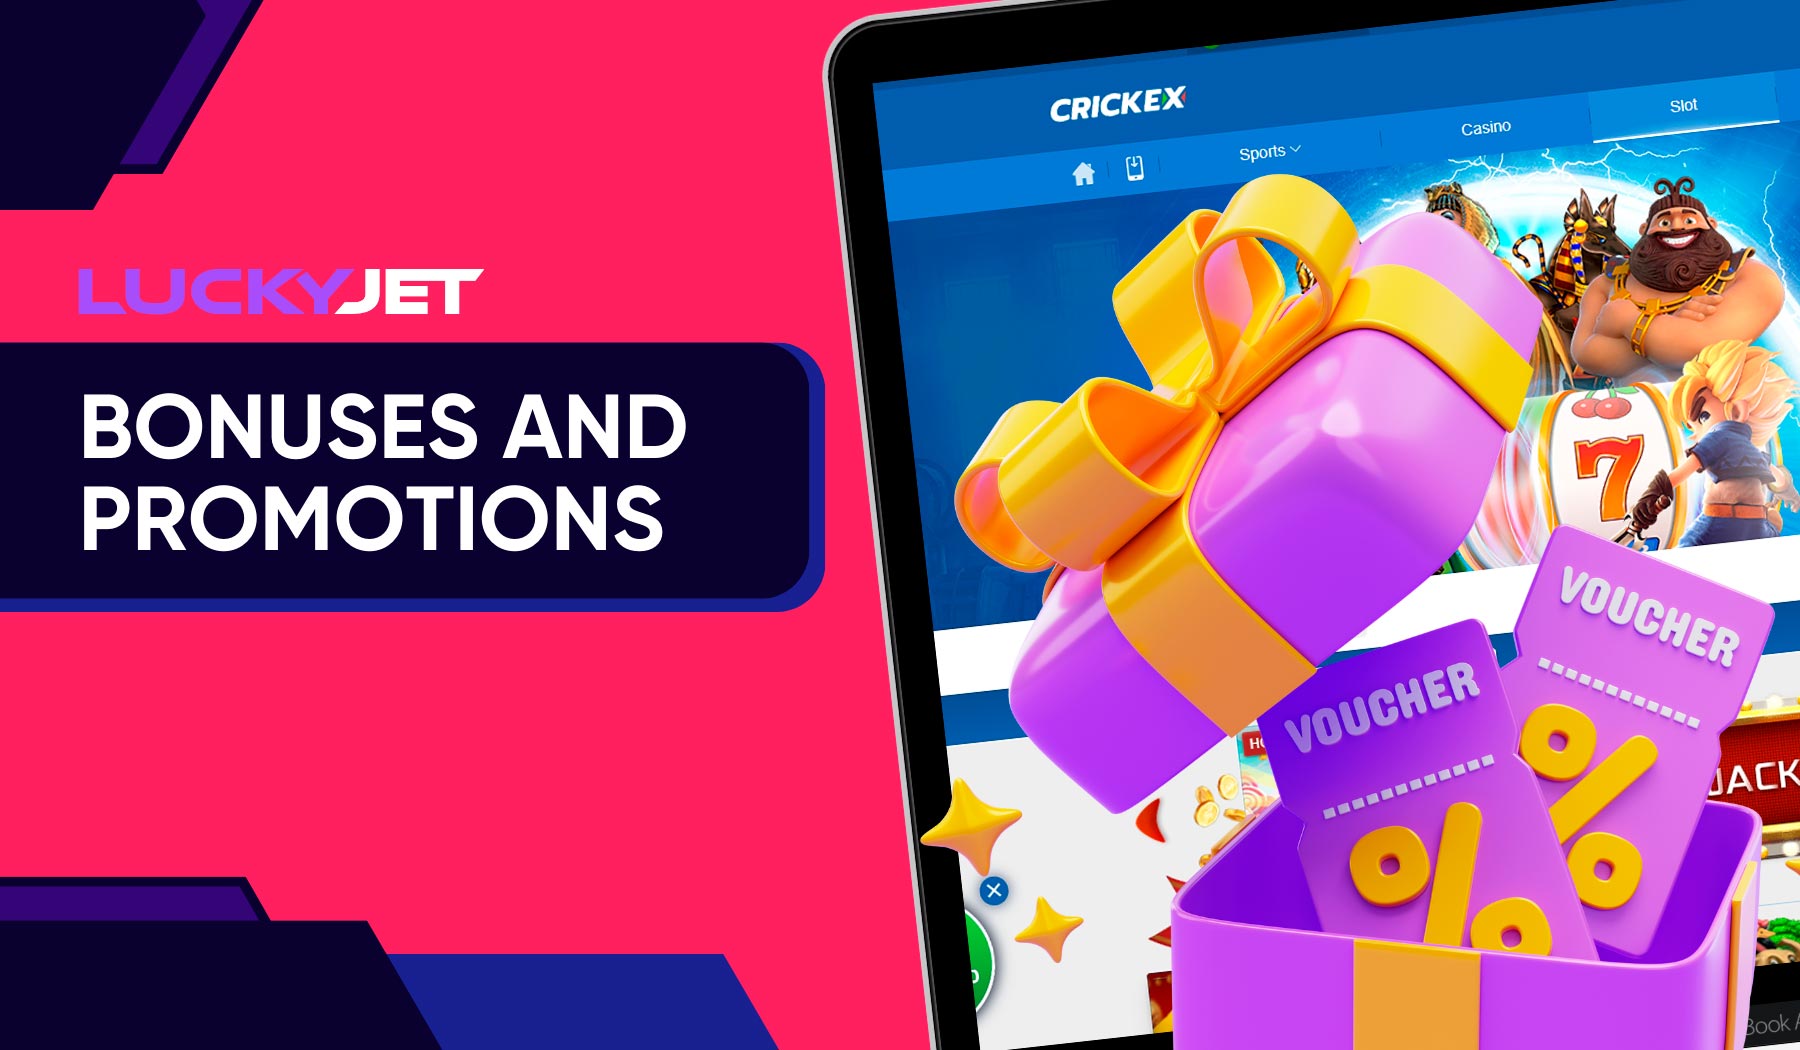 Lucky Jet at Crickex has tempting bonuses and promotions specially designed for Indian players